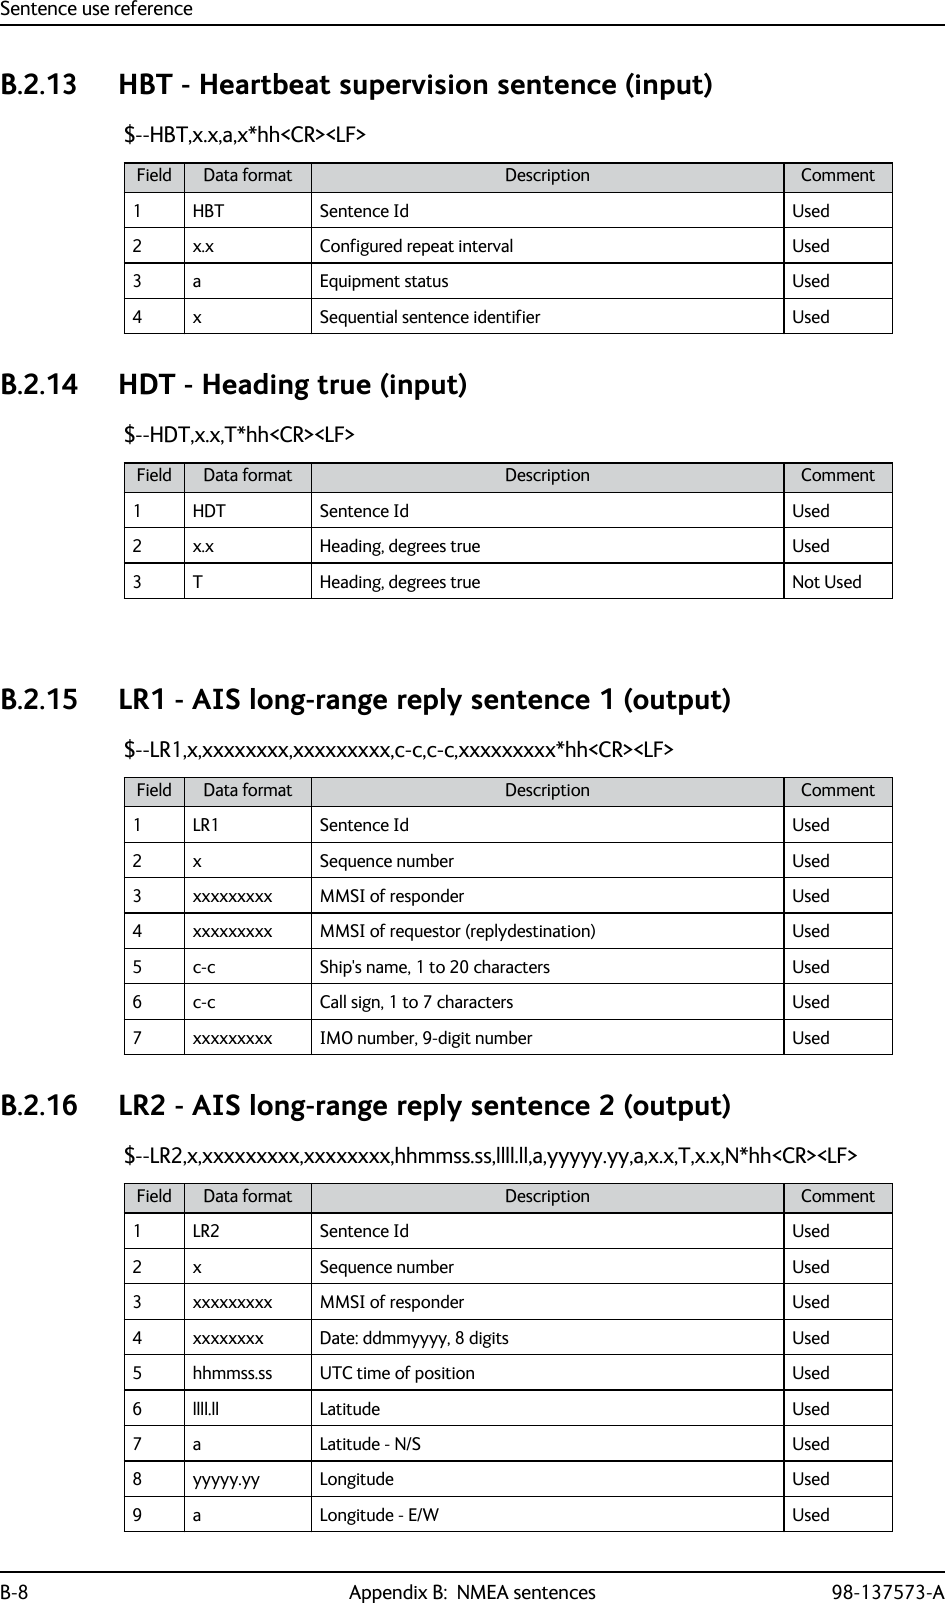 Sentence use referenceB-8 Appendix B:  NMEA sentences 98-137573-AB.2.13 HBT - Heartbeat supervision sentence (input)$--HBT,x.x,a,x*hh&lt;CR&gt;&lt;LF&gt;B.2.14 HDT - Heading true (input)$--HDT,x.x,T*hh&lt;CR&gt;&lt;LF&gt;B.2.15 LR1 - AIS long-range reply sentence 1 (output)$--LR1,x,xxxxxxxx,xxxxxxxxx,c-c,c-c,xxxxxxxxx*hh&lt;CR&gt;&lt;LF&gt;B.2.16 LR2 - AIS long-range reply sentence 2 (output)$--LR2,x,xxxxxxxxx,xxxxxxxx,hhmmss.ss,llll.ll,a,yyyyy.yy,a,x.x,T,x.x,N*hh&lt;CR&gt;&lt;LF&gt;Field Data format Description Comment1 HBT Sentence Id Used2 x.x Configured repeat interval Used3 a Equipment status Used4 x Sequential sentence identifier UsedField Data format Description Comment1 HDT Sentence Id Used2 x.x Heading, degrees true Used3 T Heading, degrees true Not UsedField Data format Description Comment1 LR1 Sentence Id Used2 x Sequence number Used3 xxxxxxxxx MMSI of responder Used4 xxxxxxxxx MMSI of requestor (replydestination) Used5 c-c  Ship&apos;s name, 1 to 20 characters  Used6 c-c   Call sign, 1 to 7 characters Used7 xxxxxxxxx IMO number, 9-digit number UsedField Data format Description Comment1 LR2 Sentence Id Used2 x Sequence number Used3 xxxxxxxxx MMSI of responder Used4 xxxxxxxx Date: ddmmyyyy, 8 digits Used5 hhmmss.ss UTC time of position Used6 llll.ll Latitude Used7 a Latitude - N/S Used8 yyyyy.yy Longitude Used9 a Longitude - E/W Used